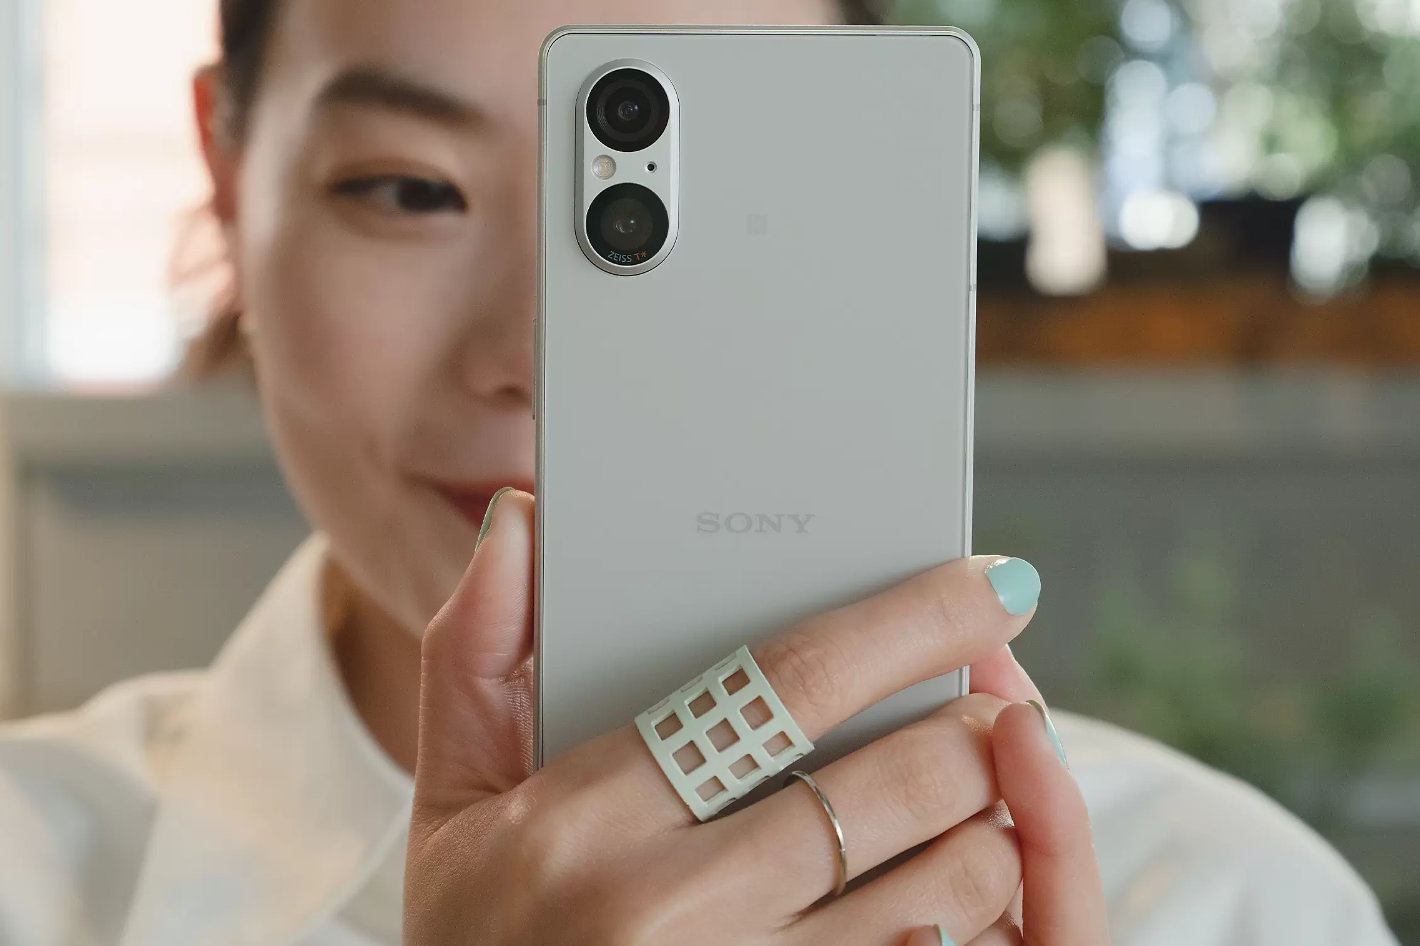 Sony Xperia 5 V: designed for photo, video and vlogging